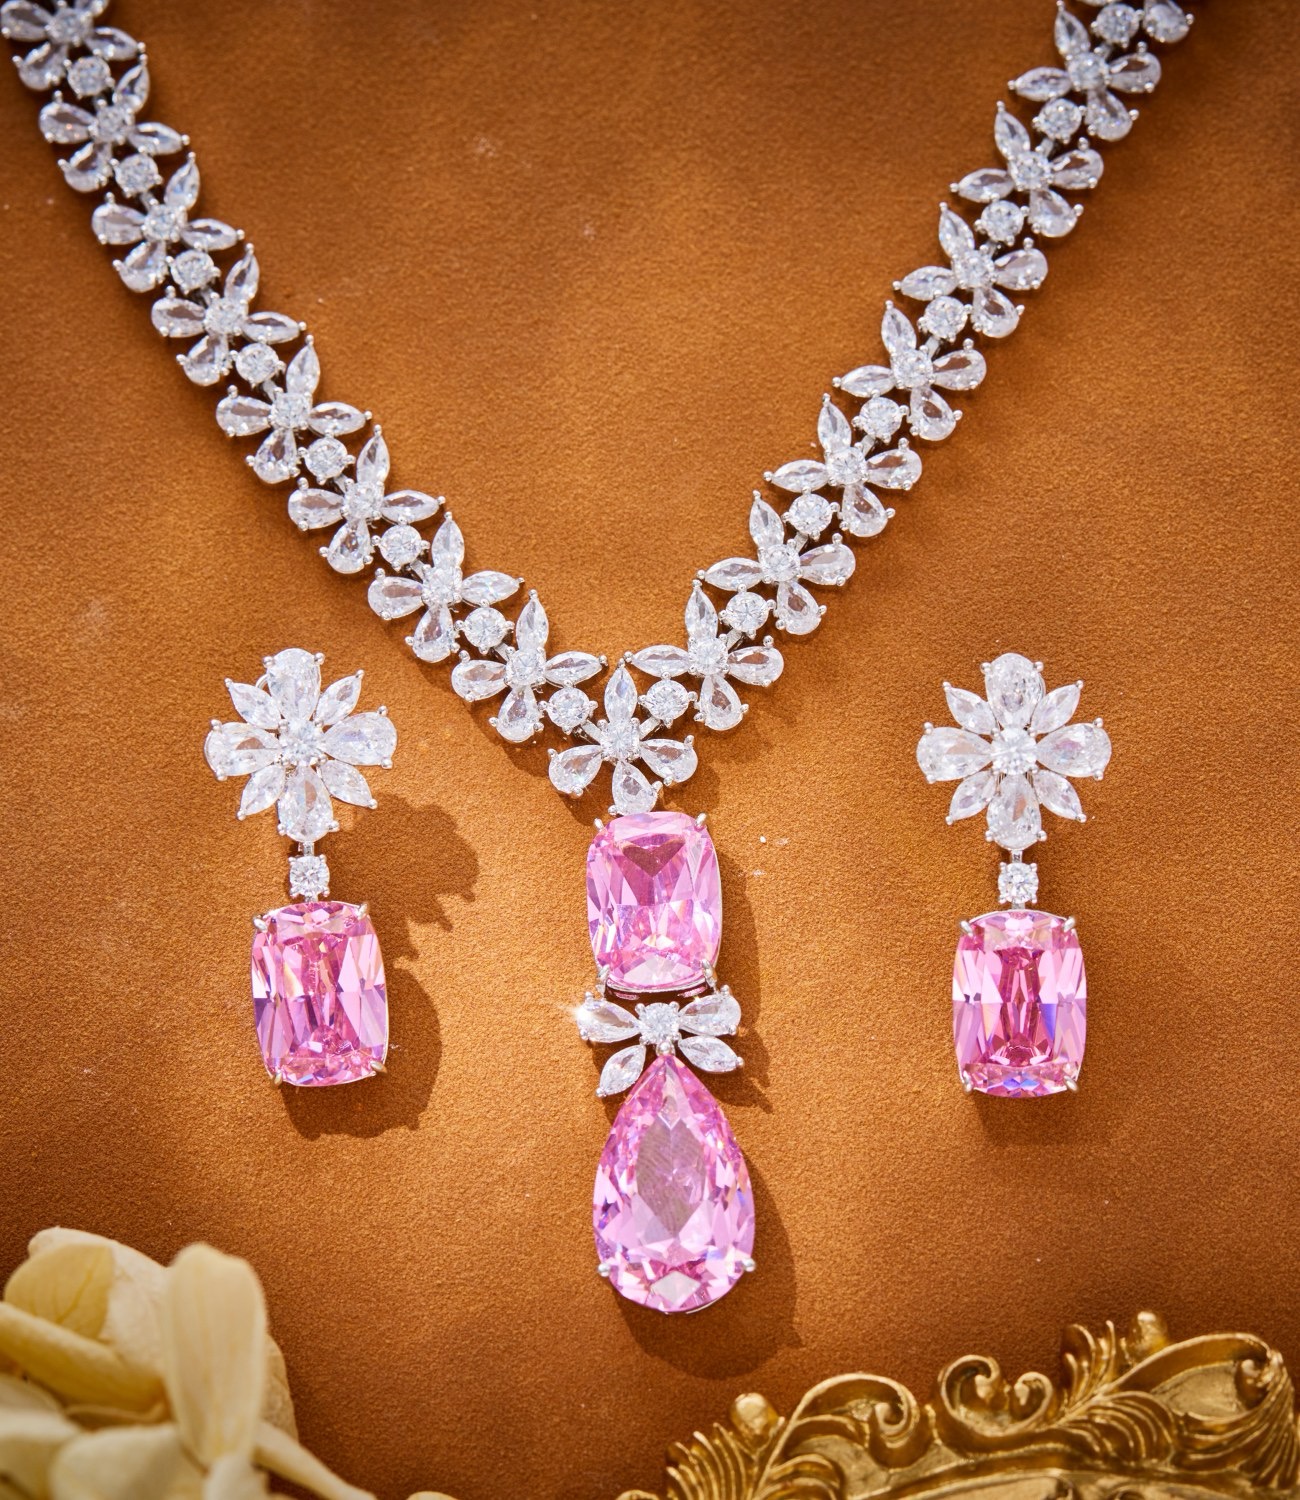 BVLGARI NECKLACE&Earrings CE13736